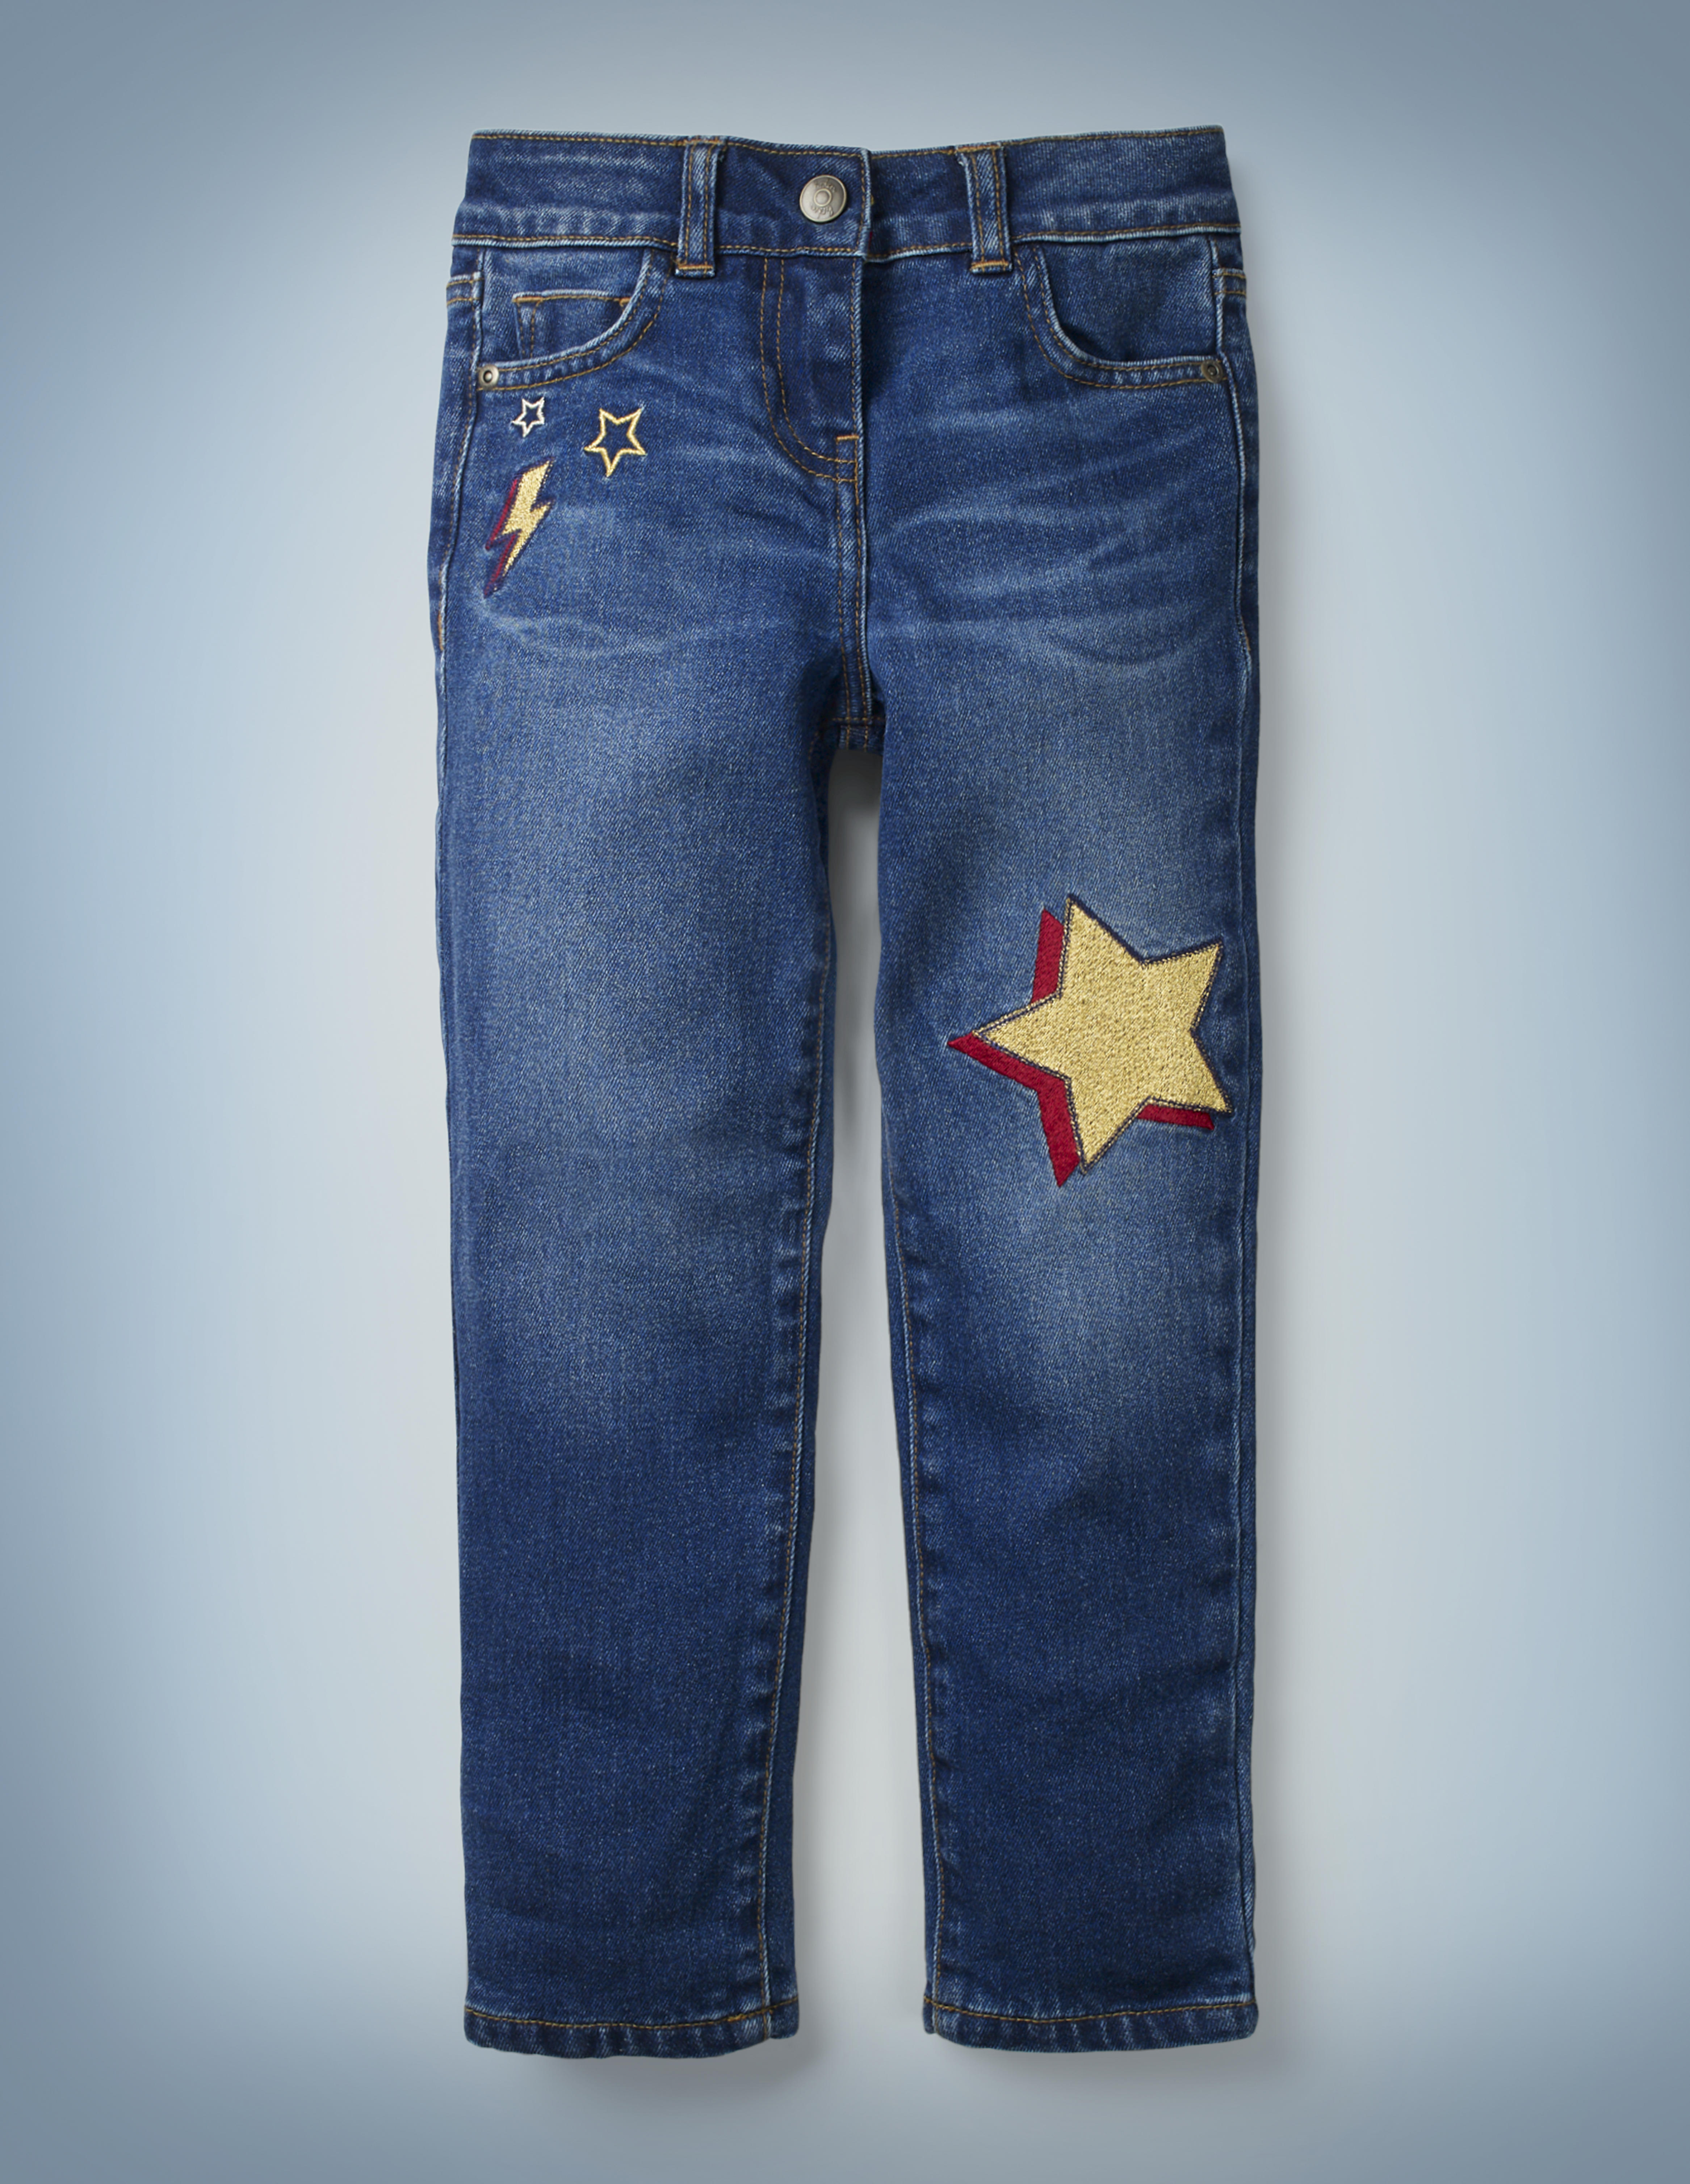 The Mini Boden Lightning Bolt Jeans include a fun design of stars and a red-and-gold lightning bolt near the right front pocket and a red-and-gold star in the left knee area. They retail for £28.